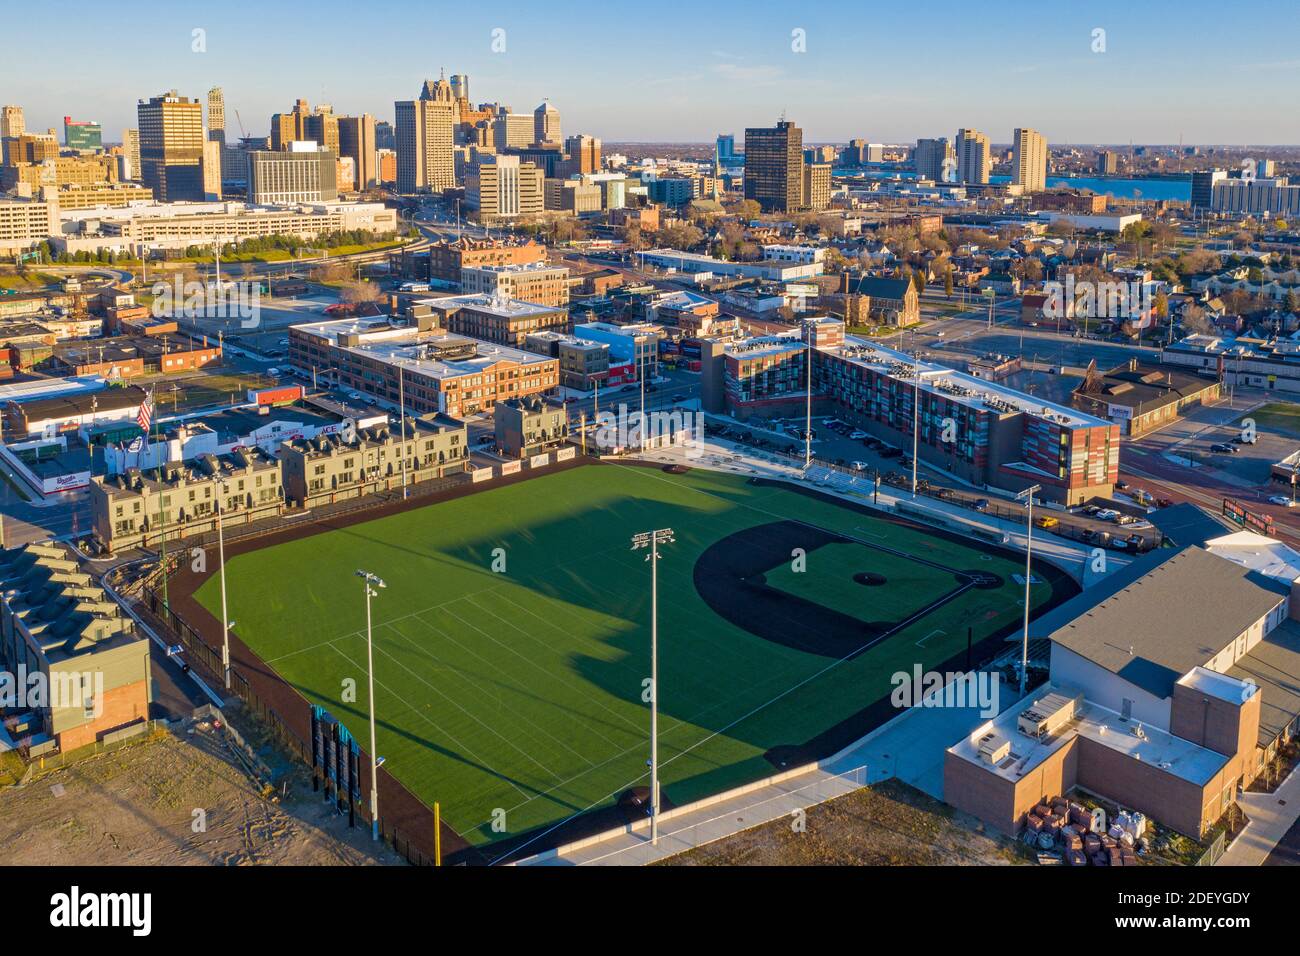 Detroit, Michigan - The site of the former Tiger Stadium major league  baseball park. It has been redeveloped as a youth sports field called the  Corner Stock Photo - Alamy